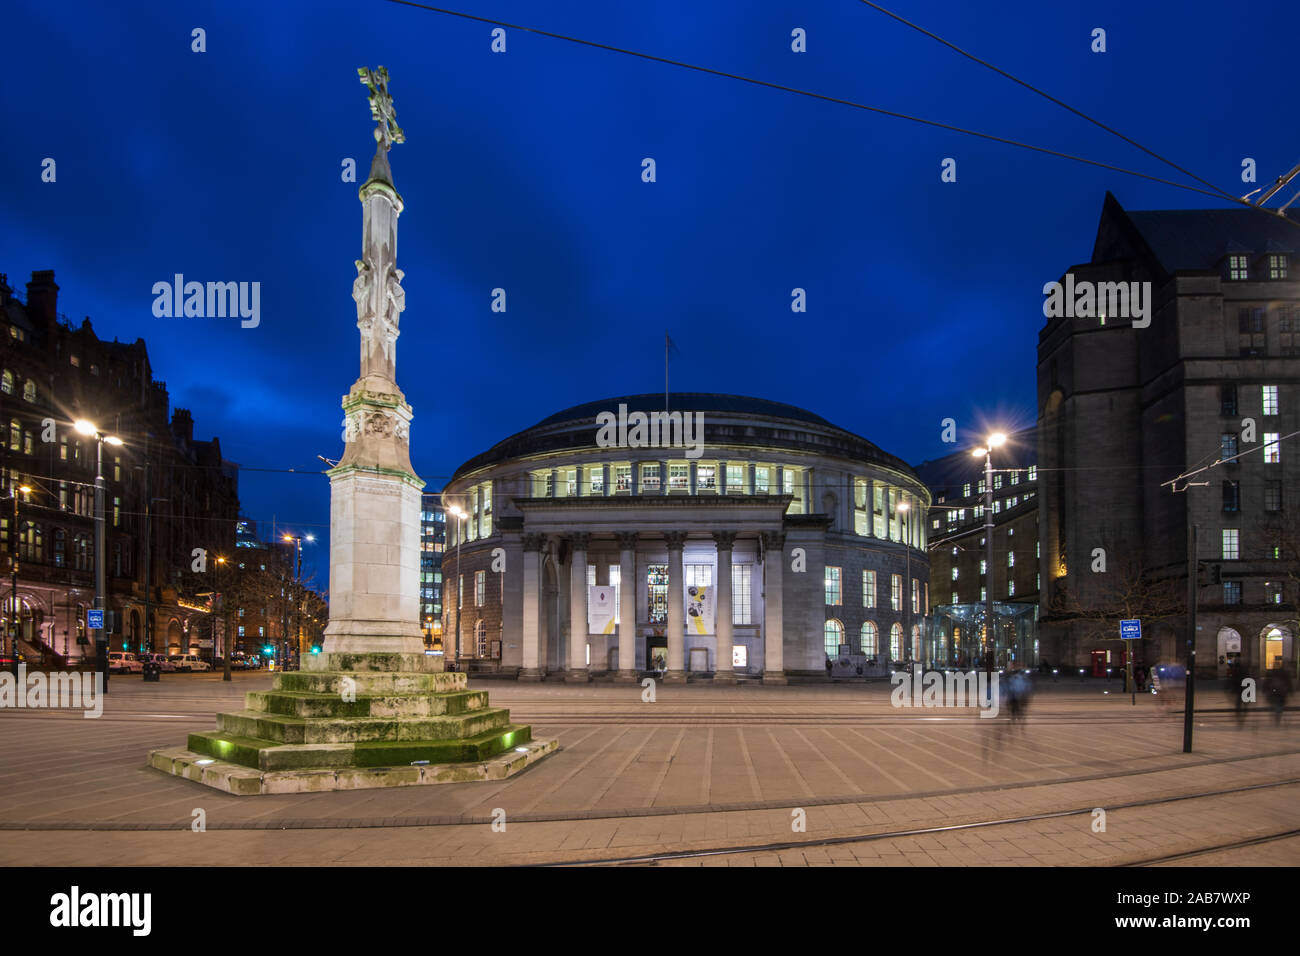 Manchester Library and St. Peter Square at night, Manchester, England, United Kingdom, Europe Stock Photo